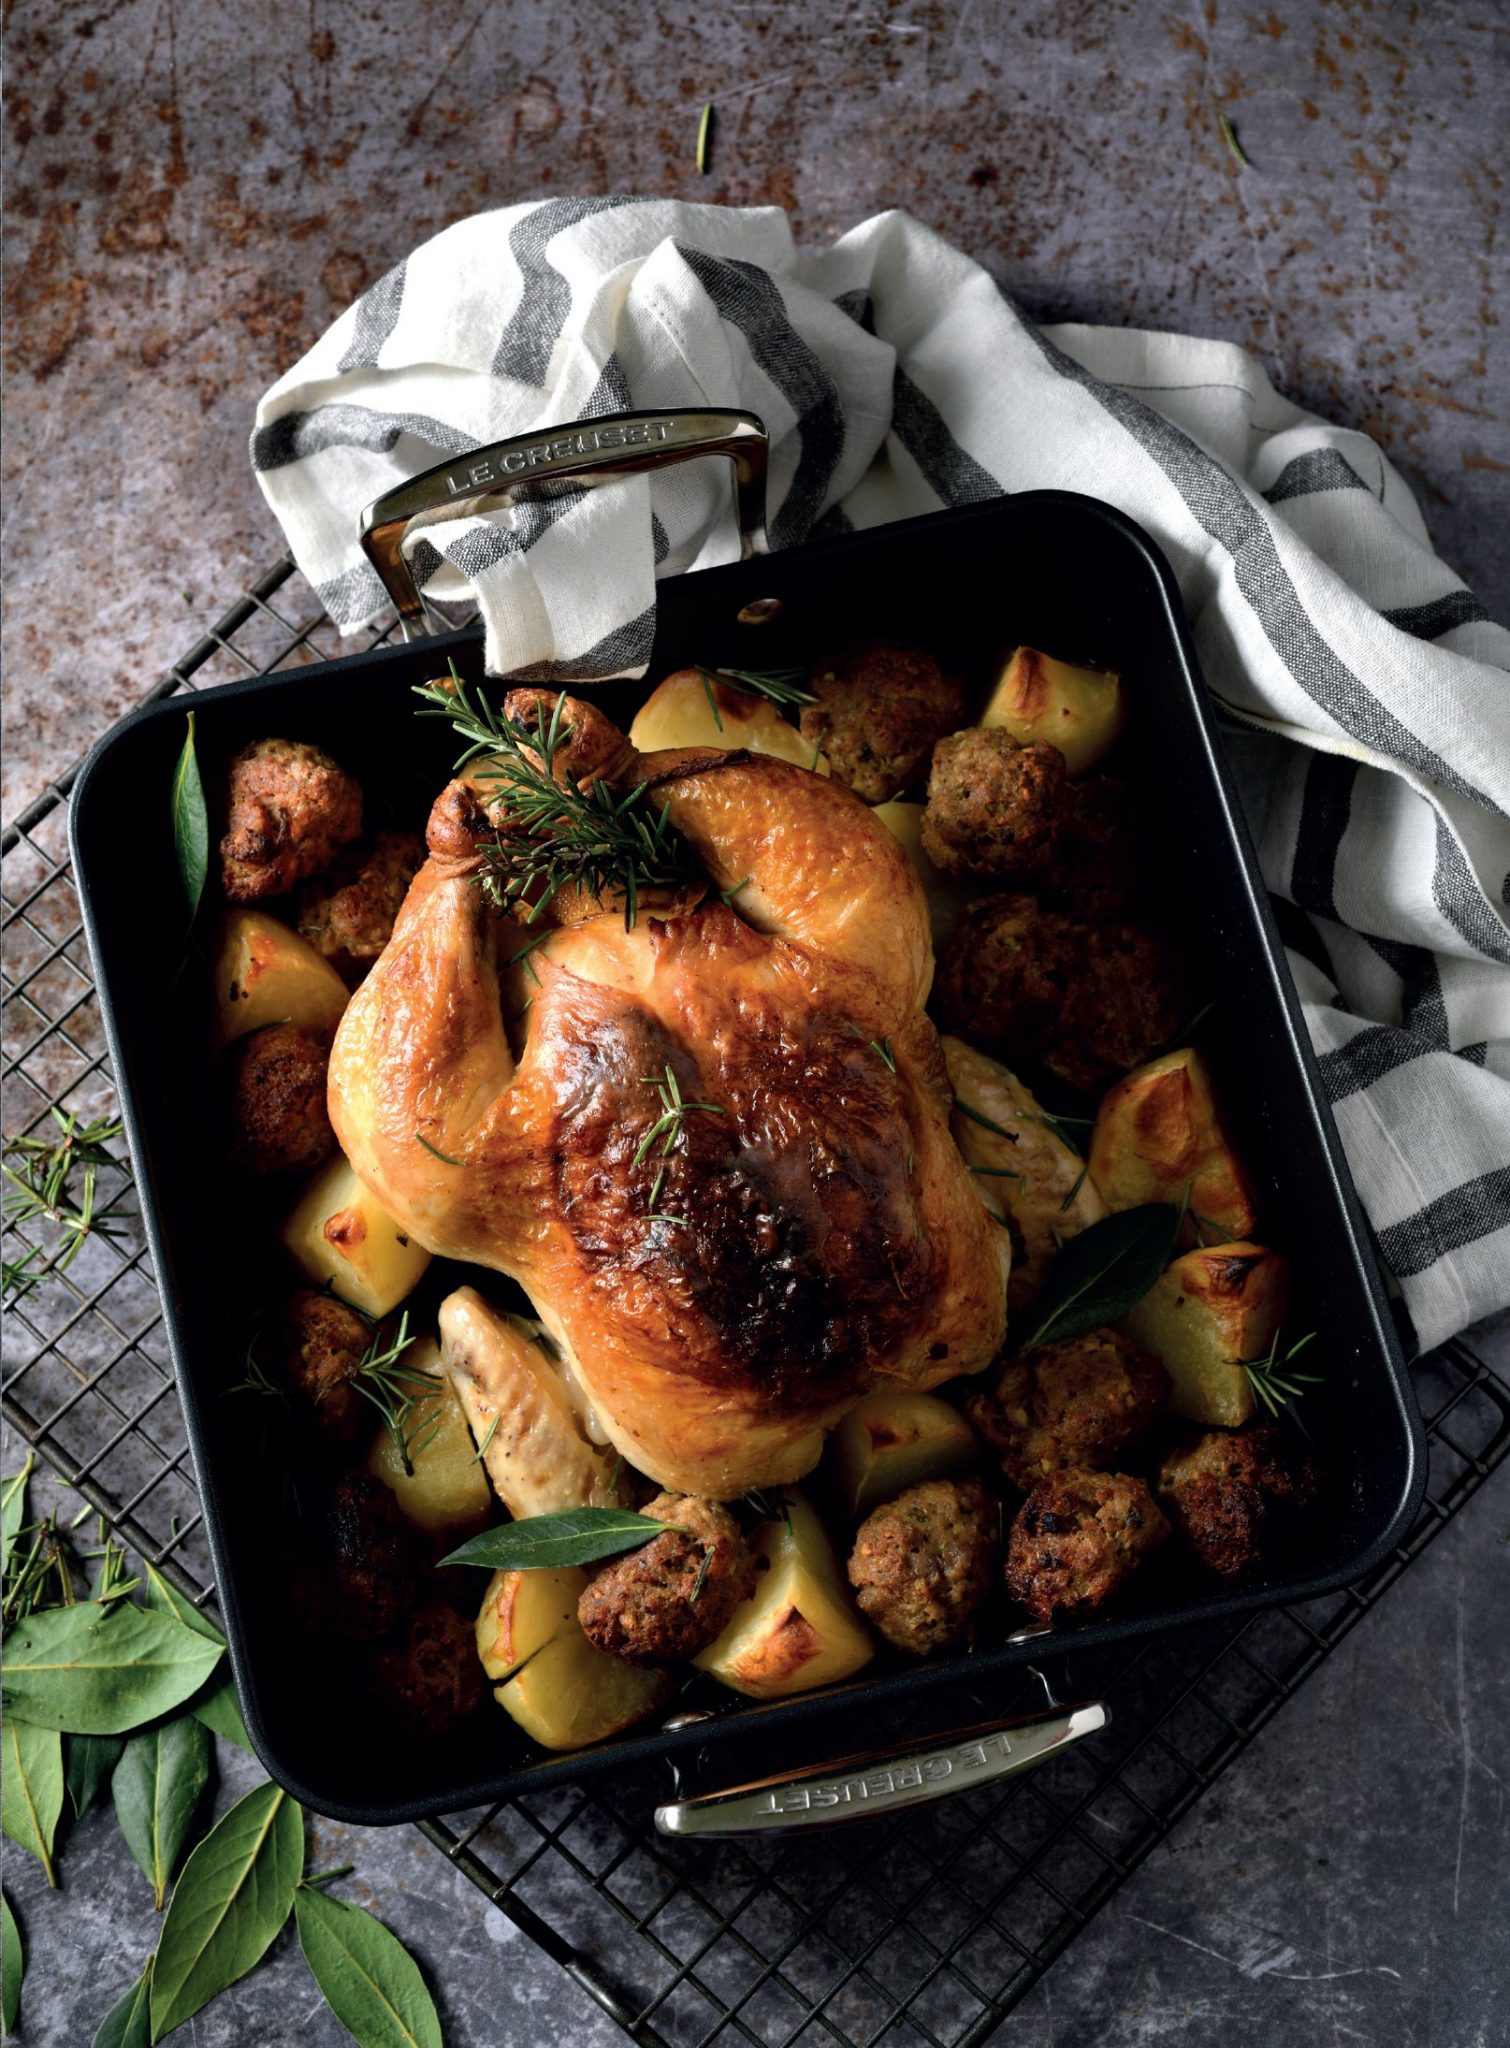 Dorah Sithole's Perfect Roast Chicken, from her last cookbook '40 Years of Iconic Cooking, Sonia Cabano blog eatdrinkcapetown food 